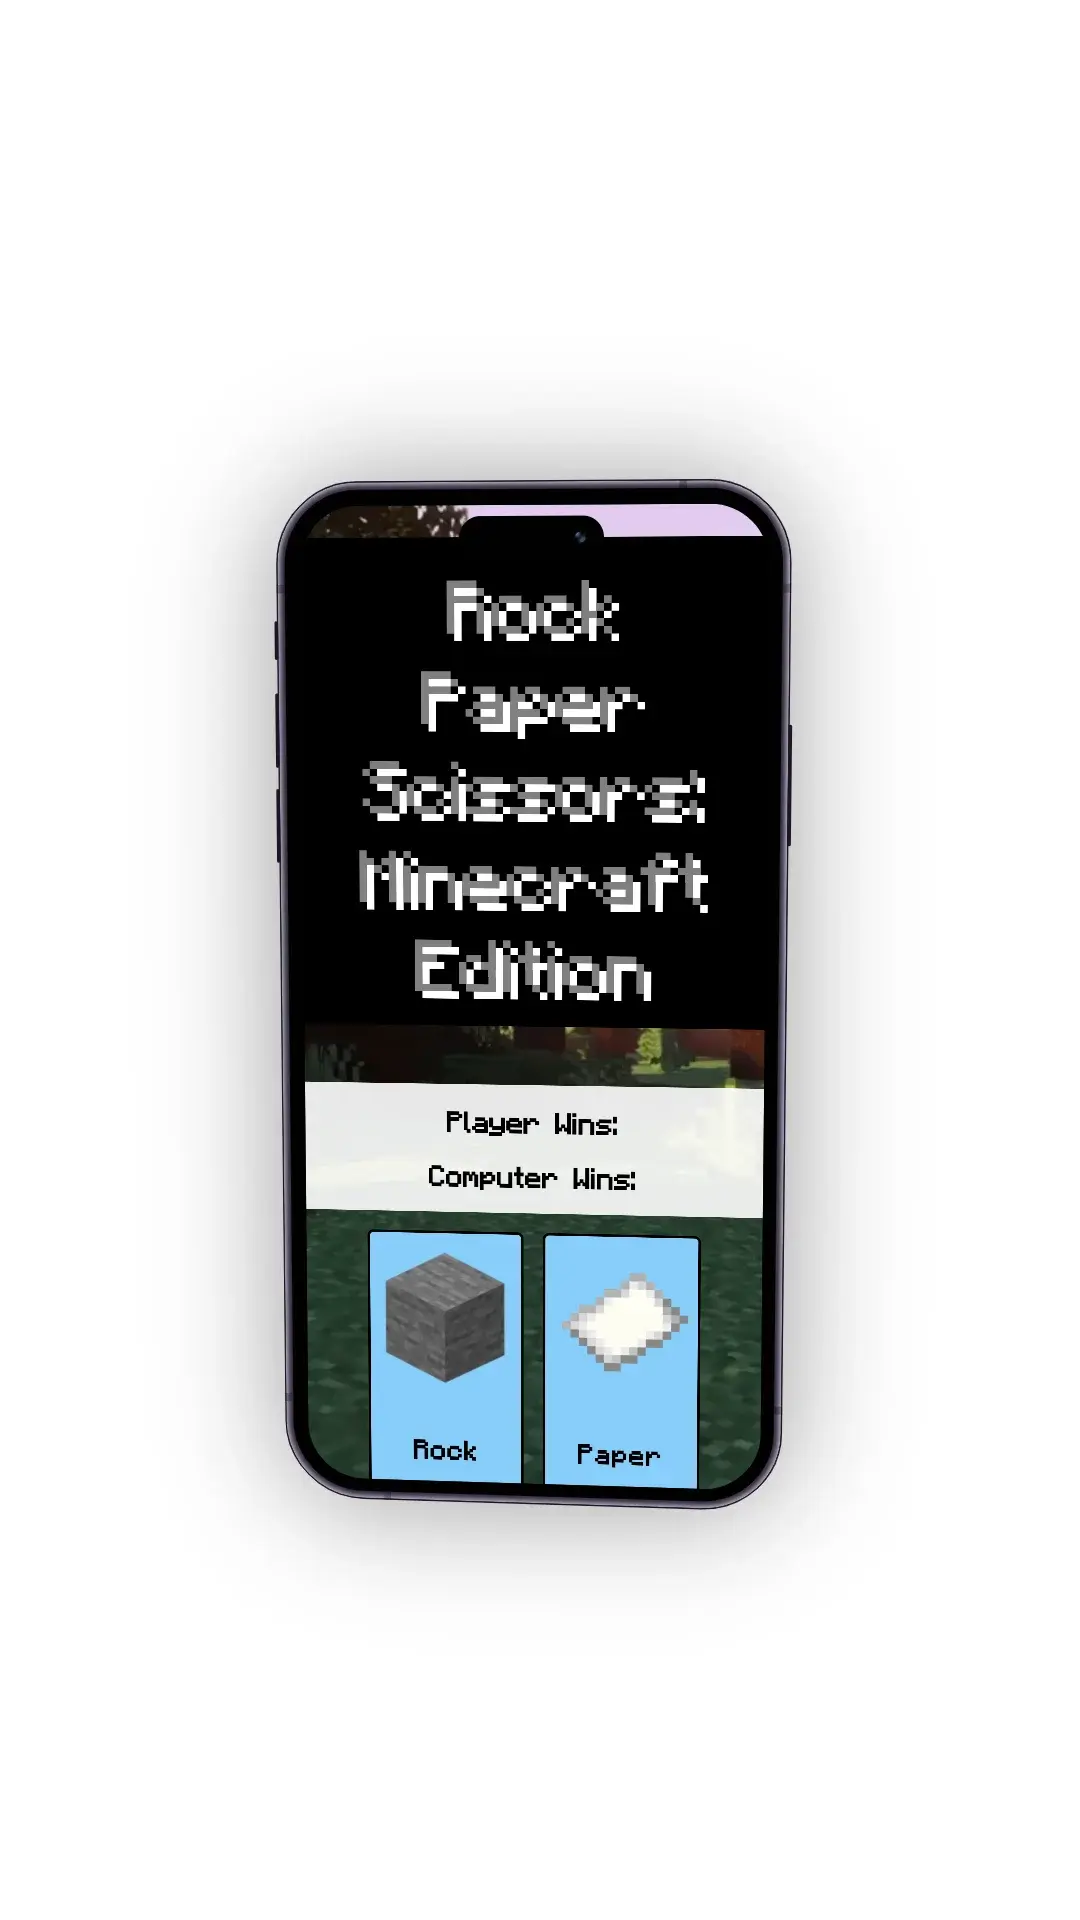 Mockup of a smartphone showcasing the 'Rock Paper Scissors: Minecraft Edition' application. The title is prominent at the top with a Minecraft forest background. Below, there are score sections for the player and computer, followed by the game choices of Rock and Paper, represented by Minecraft-themed images.